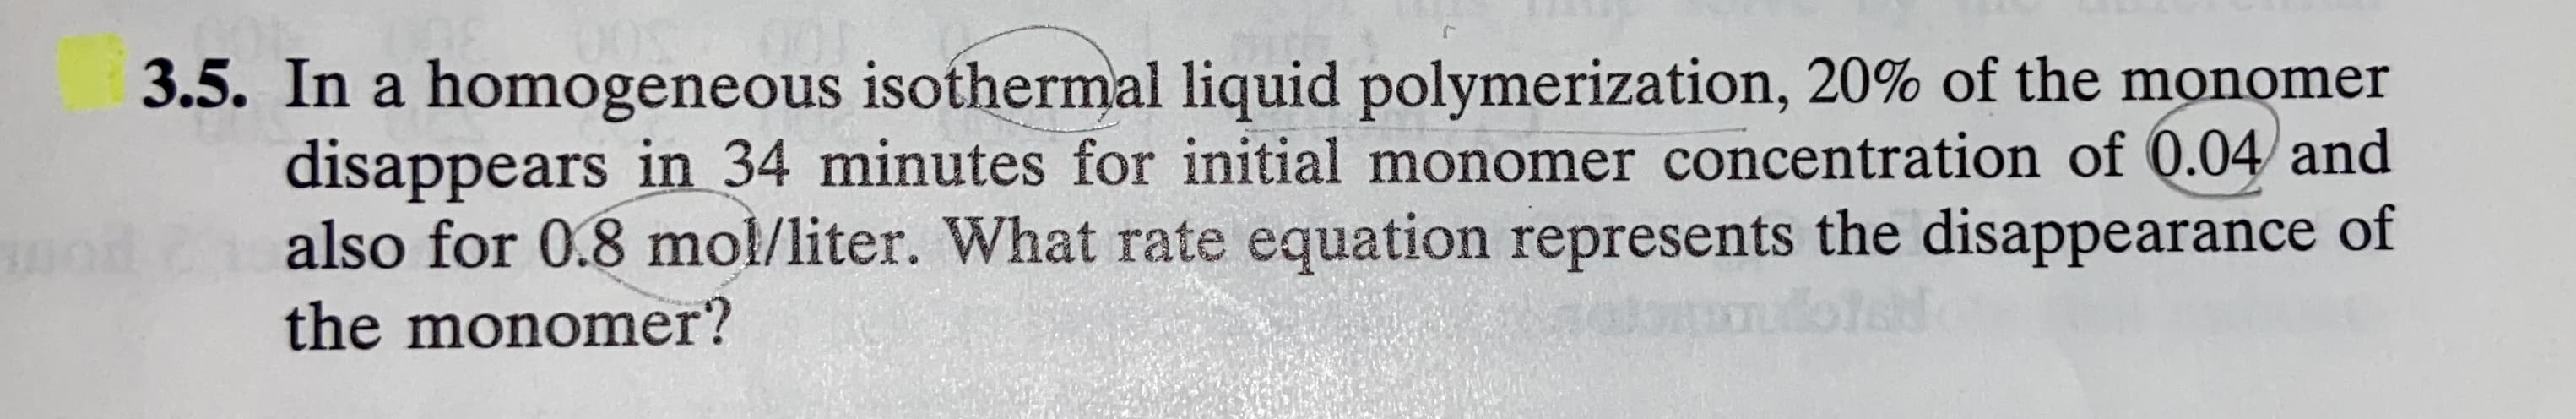 In a homogeneous isothermal liquid polymerization, 20% of the monomer
disappears in 34 minutes for initial monomer concentration of 0.04 and
also for 0.8 mol/liter. What rate equation represents the disappearance of
the monomer?
